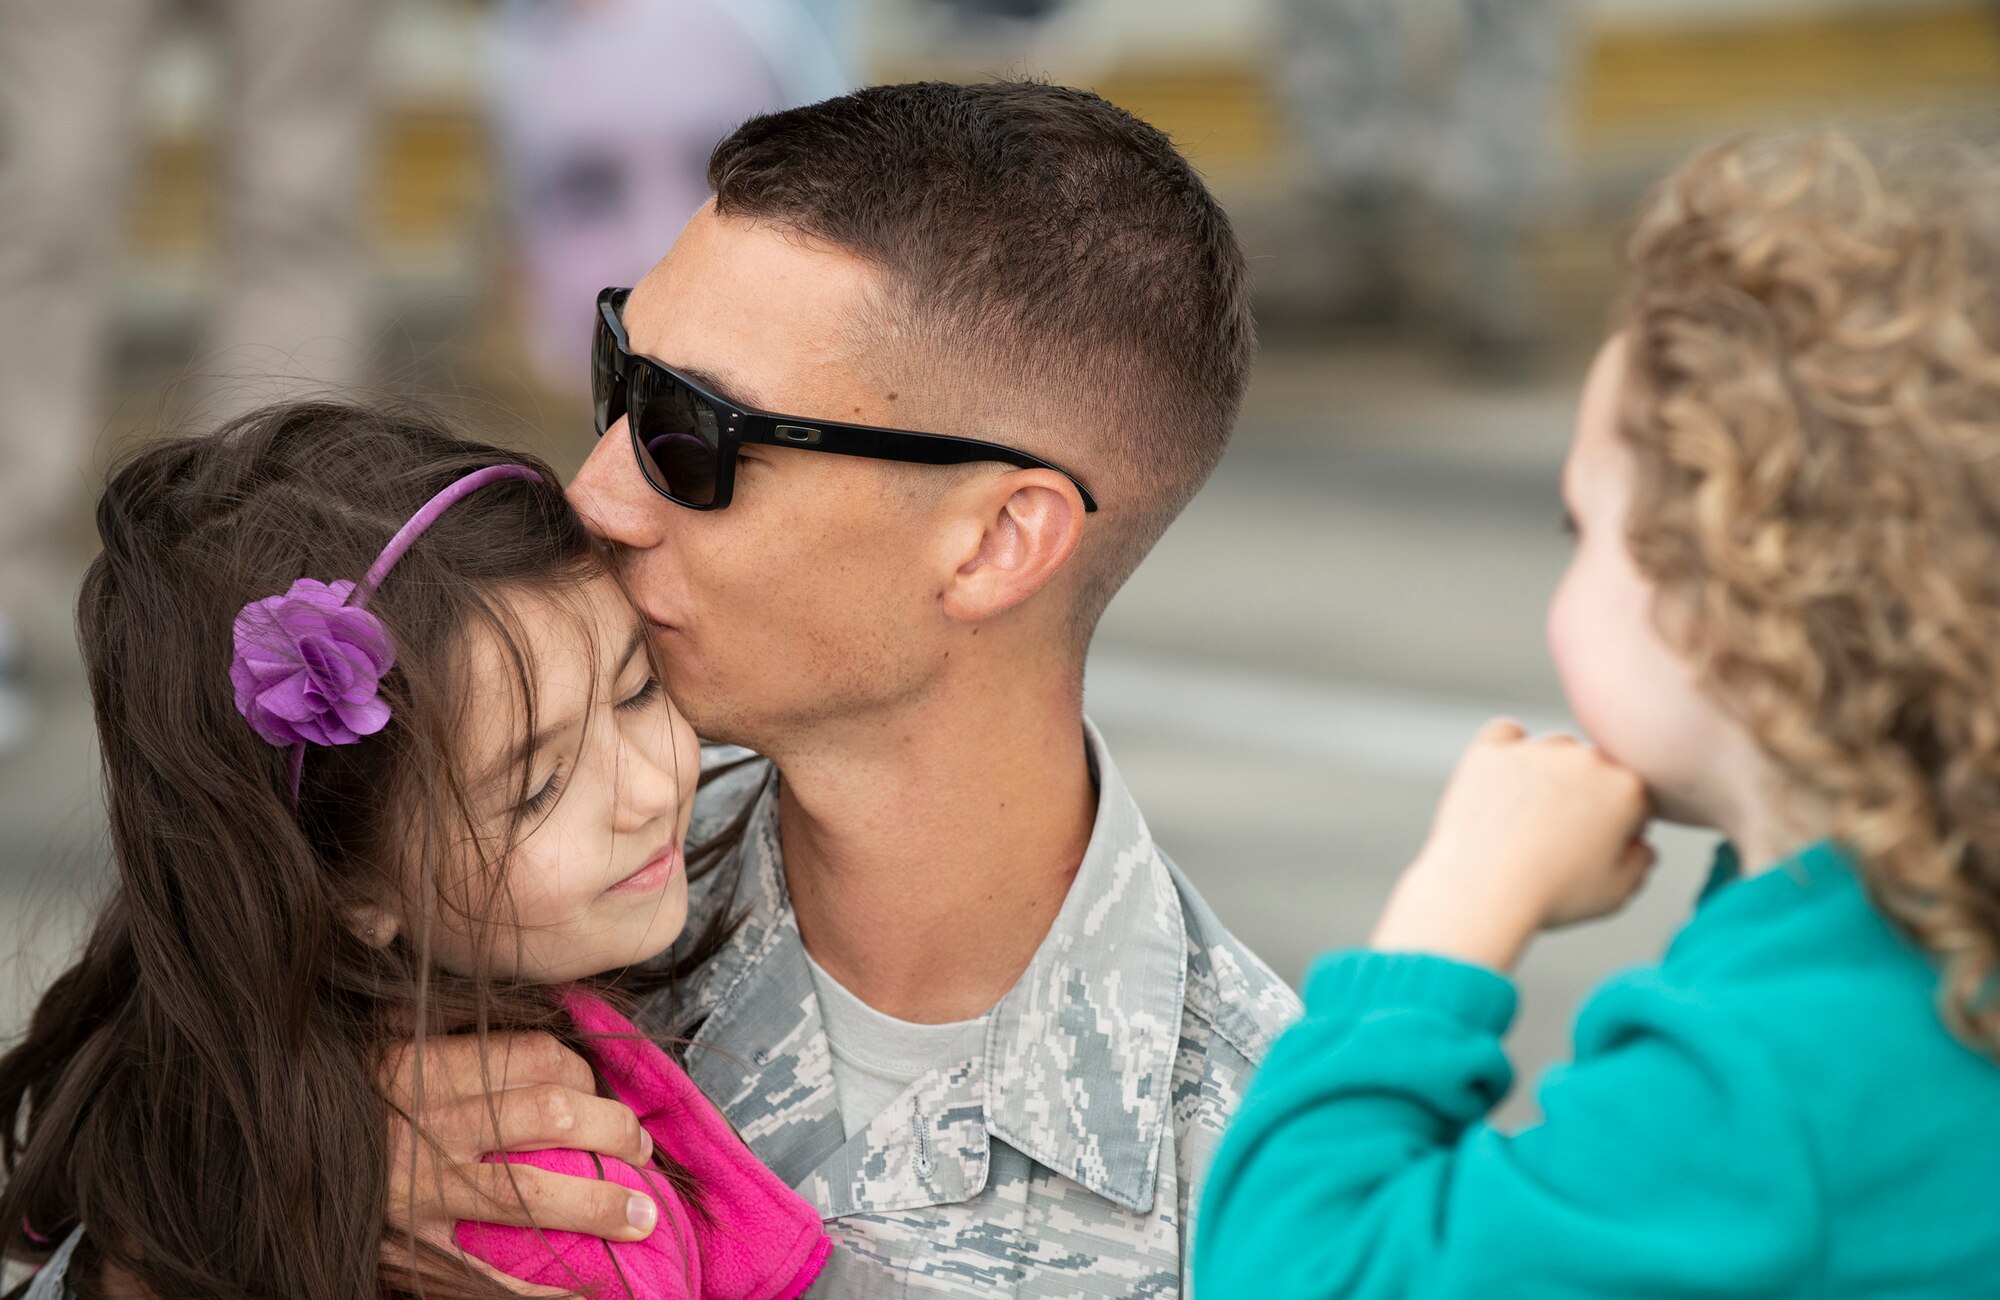 A U.S. Air Force member from the 48th Fighter Wing reunites with his family at Royal Air Force Lakenheath, England, July 12, 2019. Members of the 493rd Fighter Squadron and 748th Aircraft Maintenance Squadron were deployed to an undisclosed location for six months. (U.S. Air Force photo by Senior Airman Malcolm Mayfield)